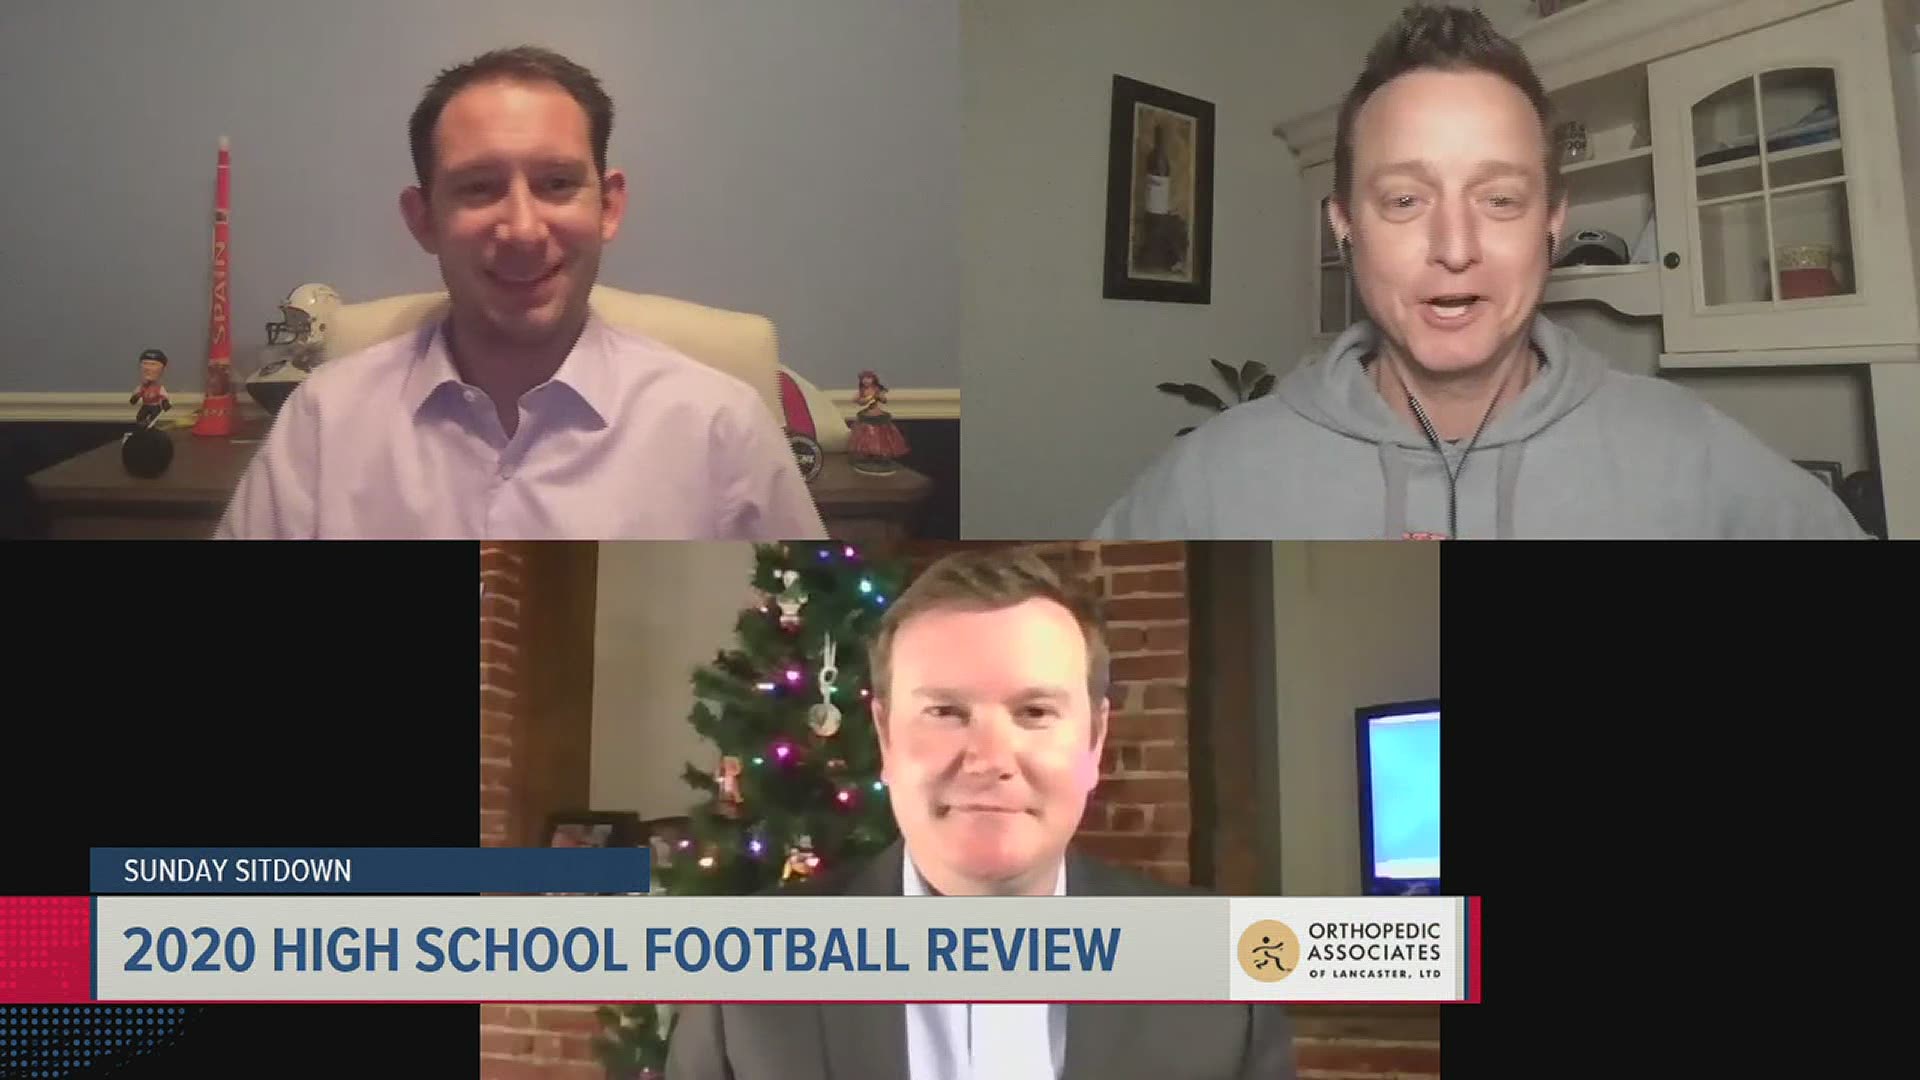 Todd Sadowski, Andrew Kalista, and Alex Cawley review the 2020 high school football season after state champs have been crowned.